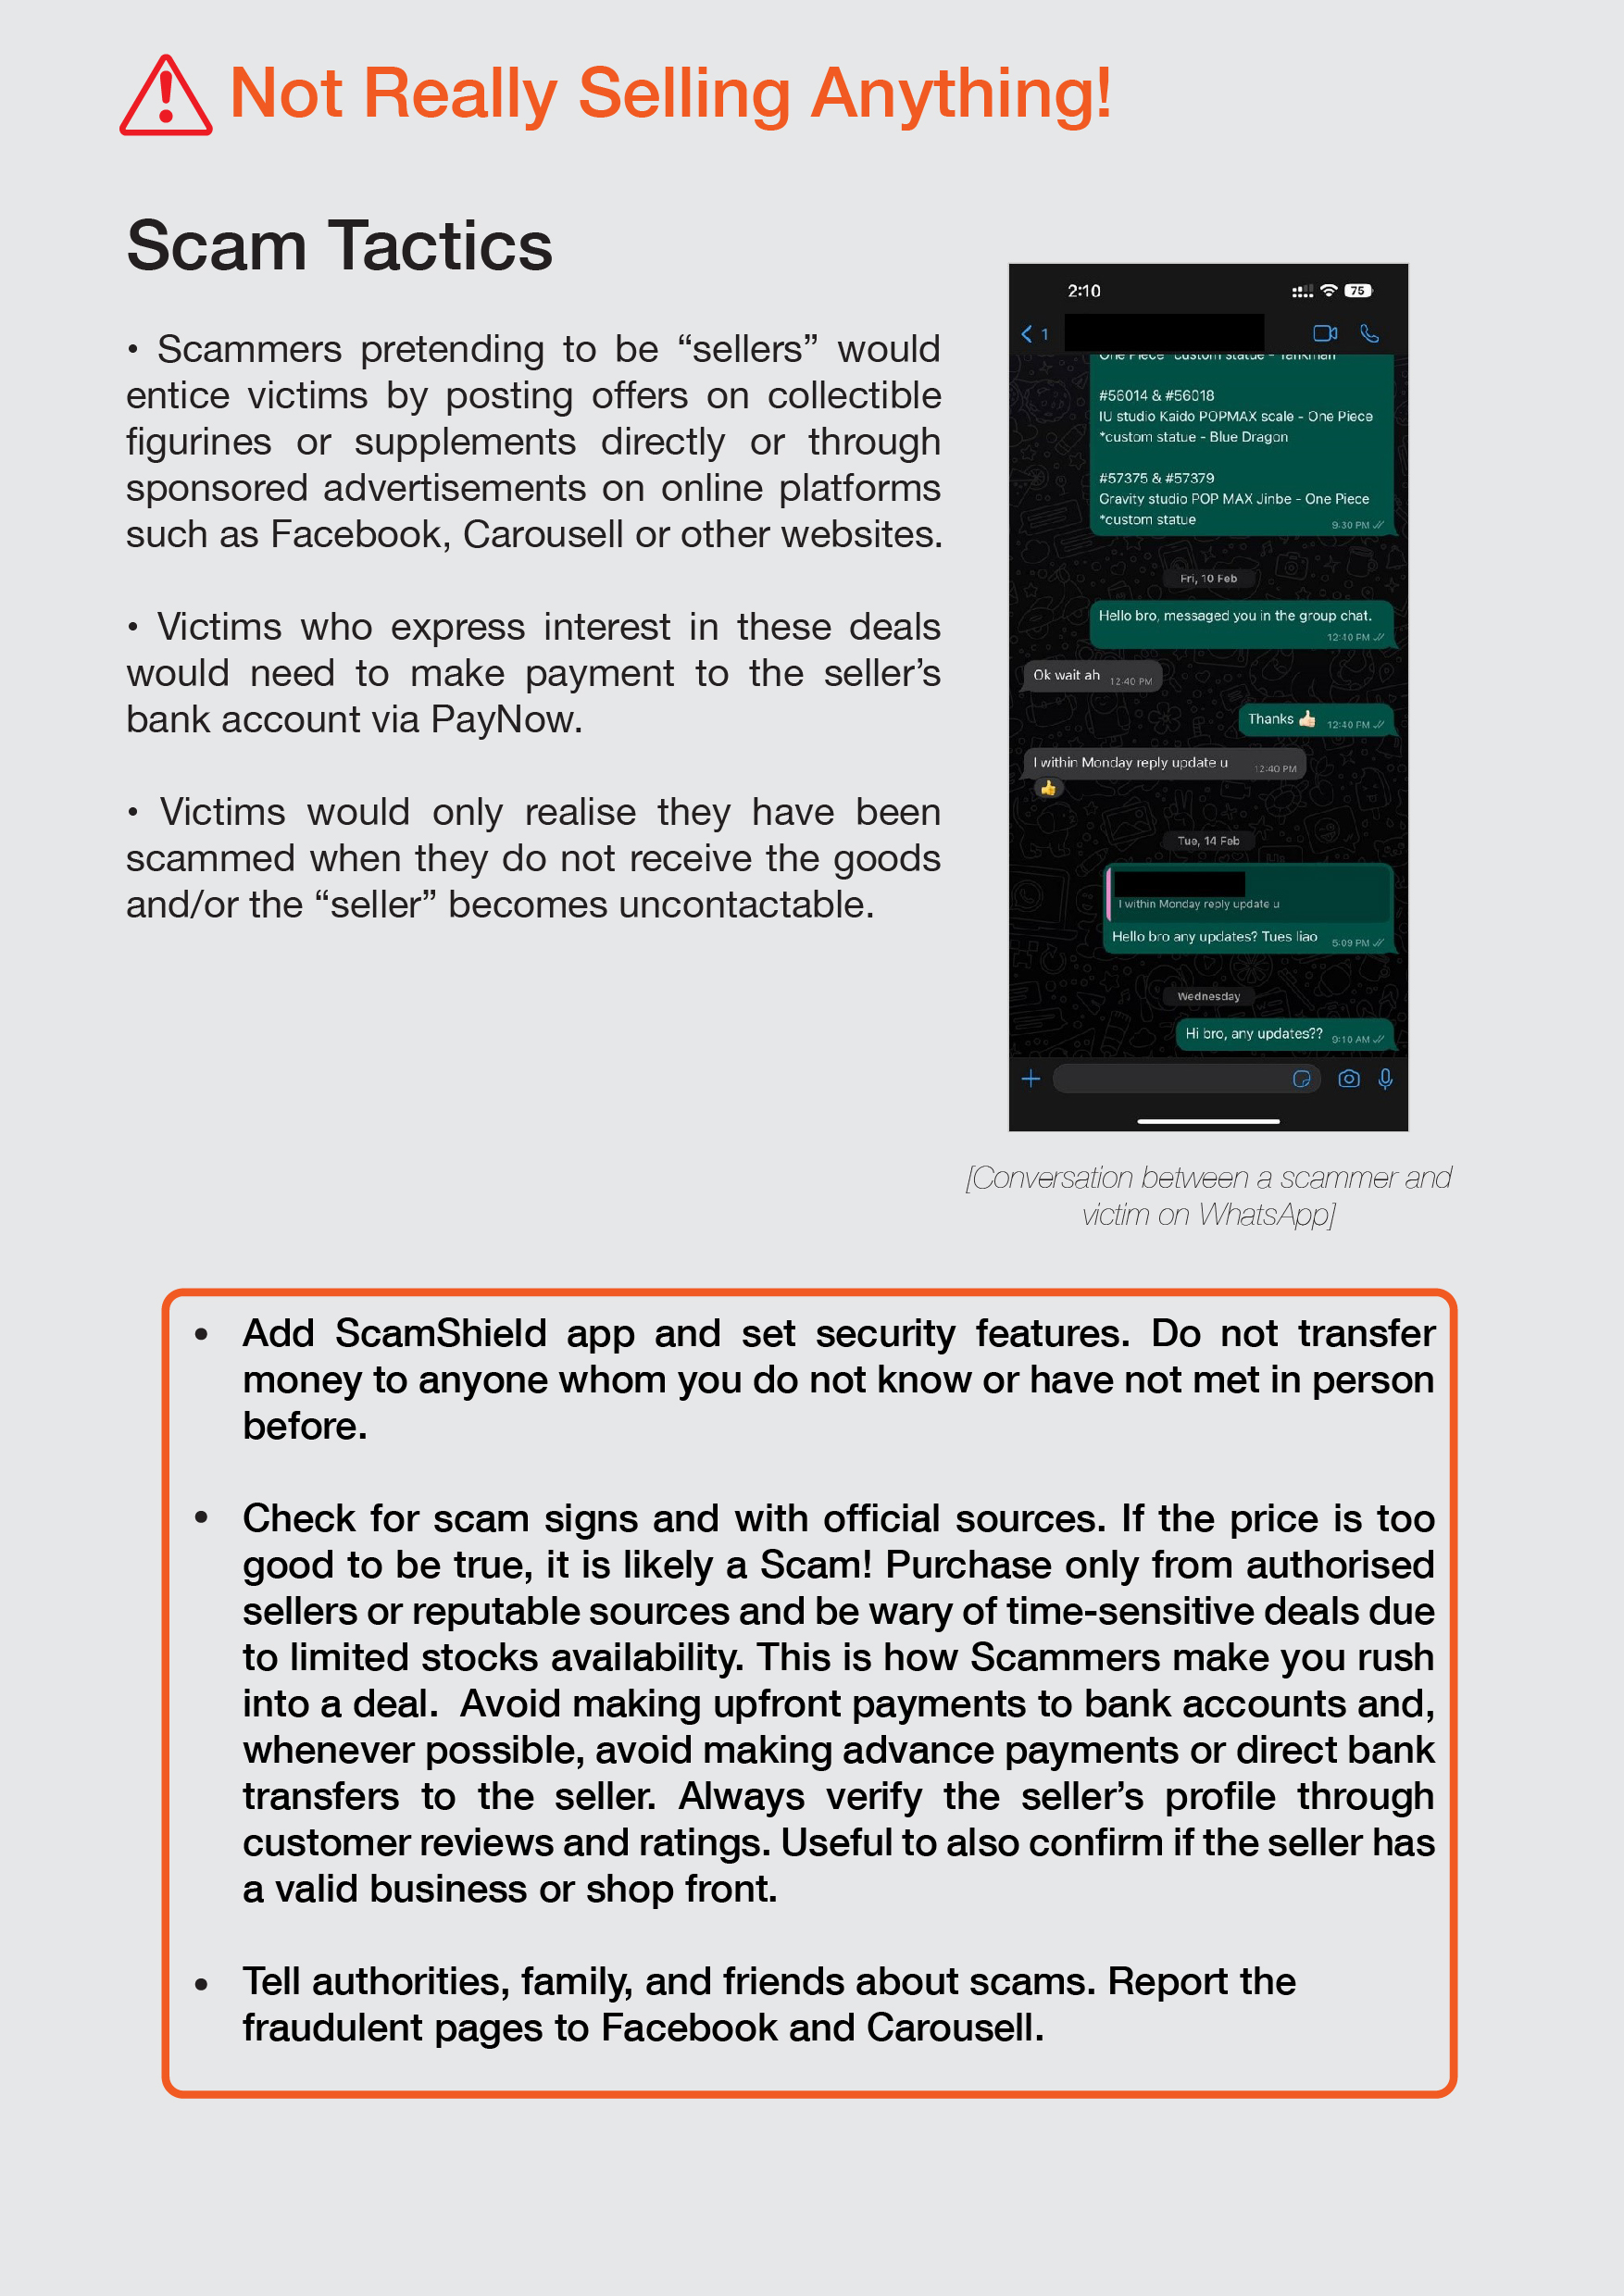 Weekly Bulletin Issue 7 - Scam Tactics